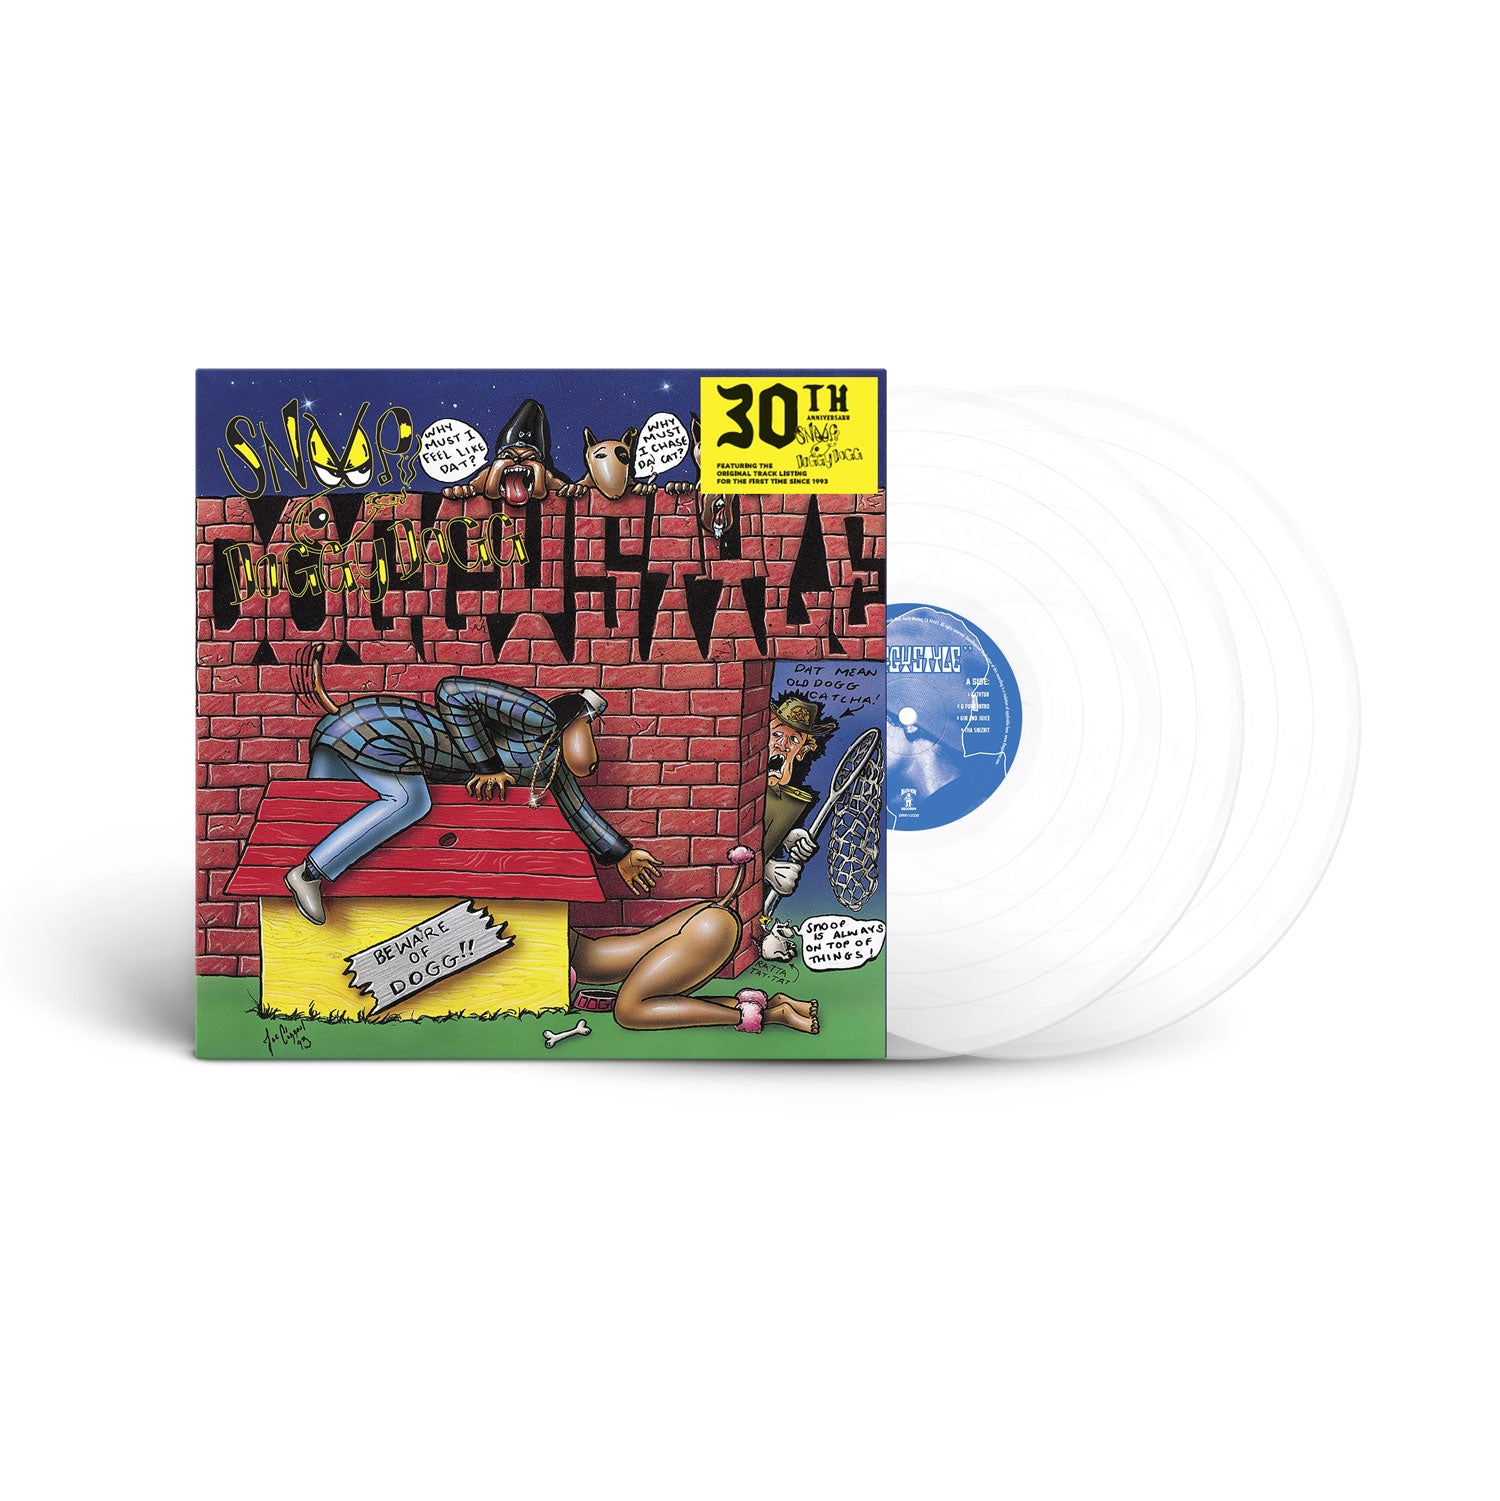 Snoop Dogg - Doggystyle (30th Anniversary): Limited Edition Clear Vinyl 2LP